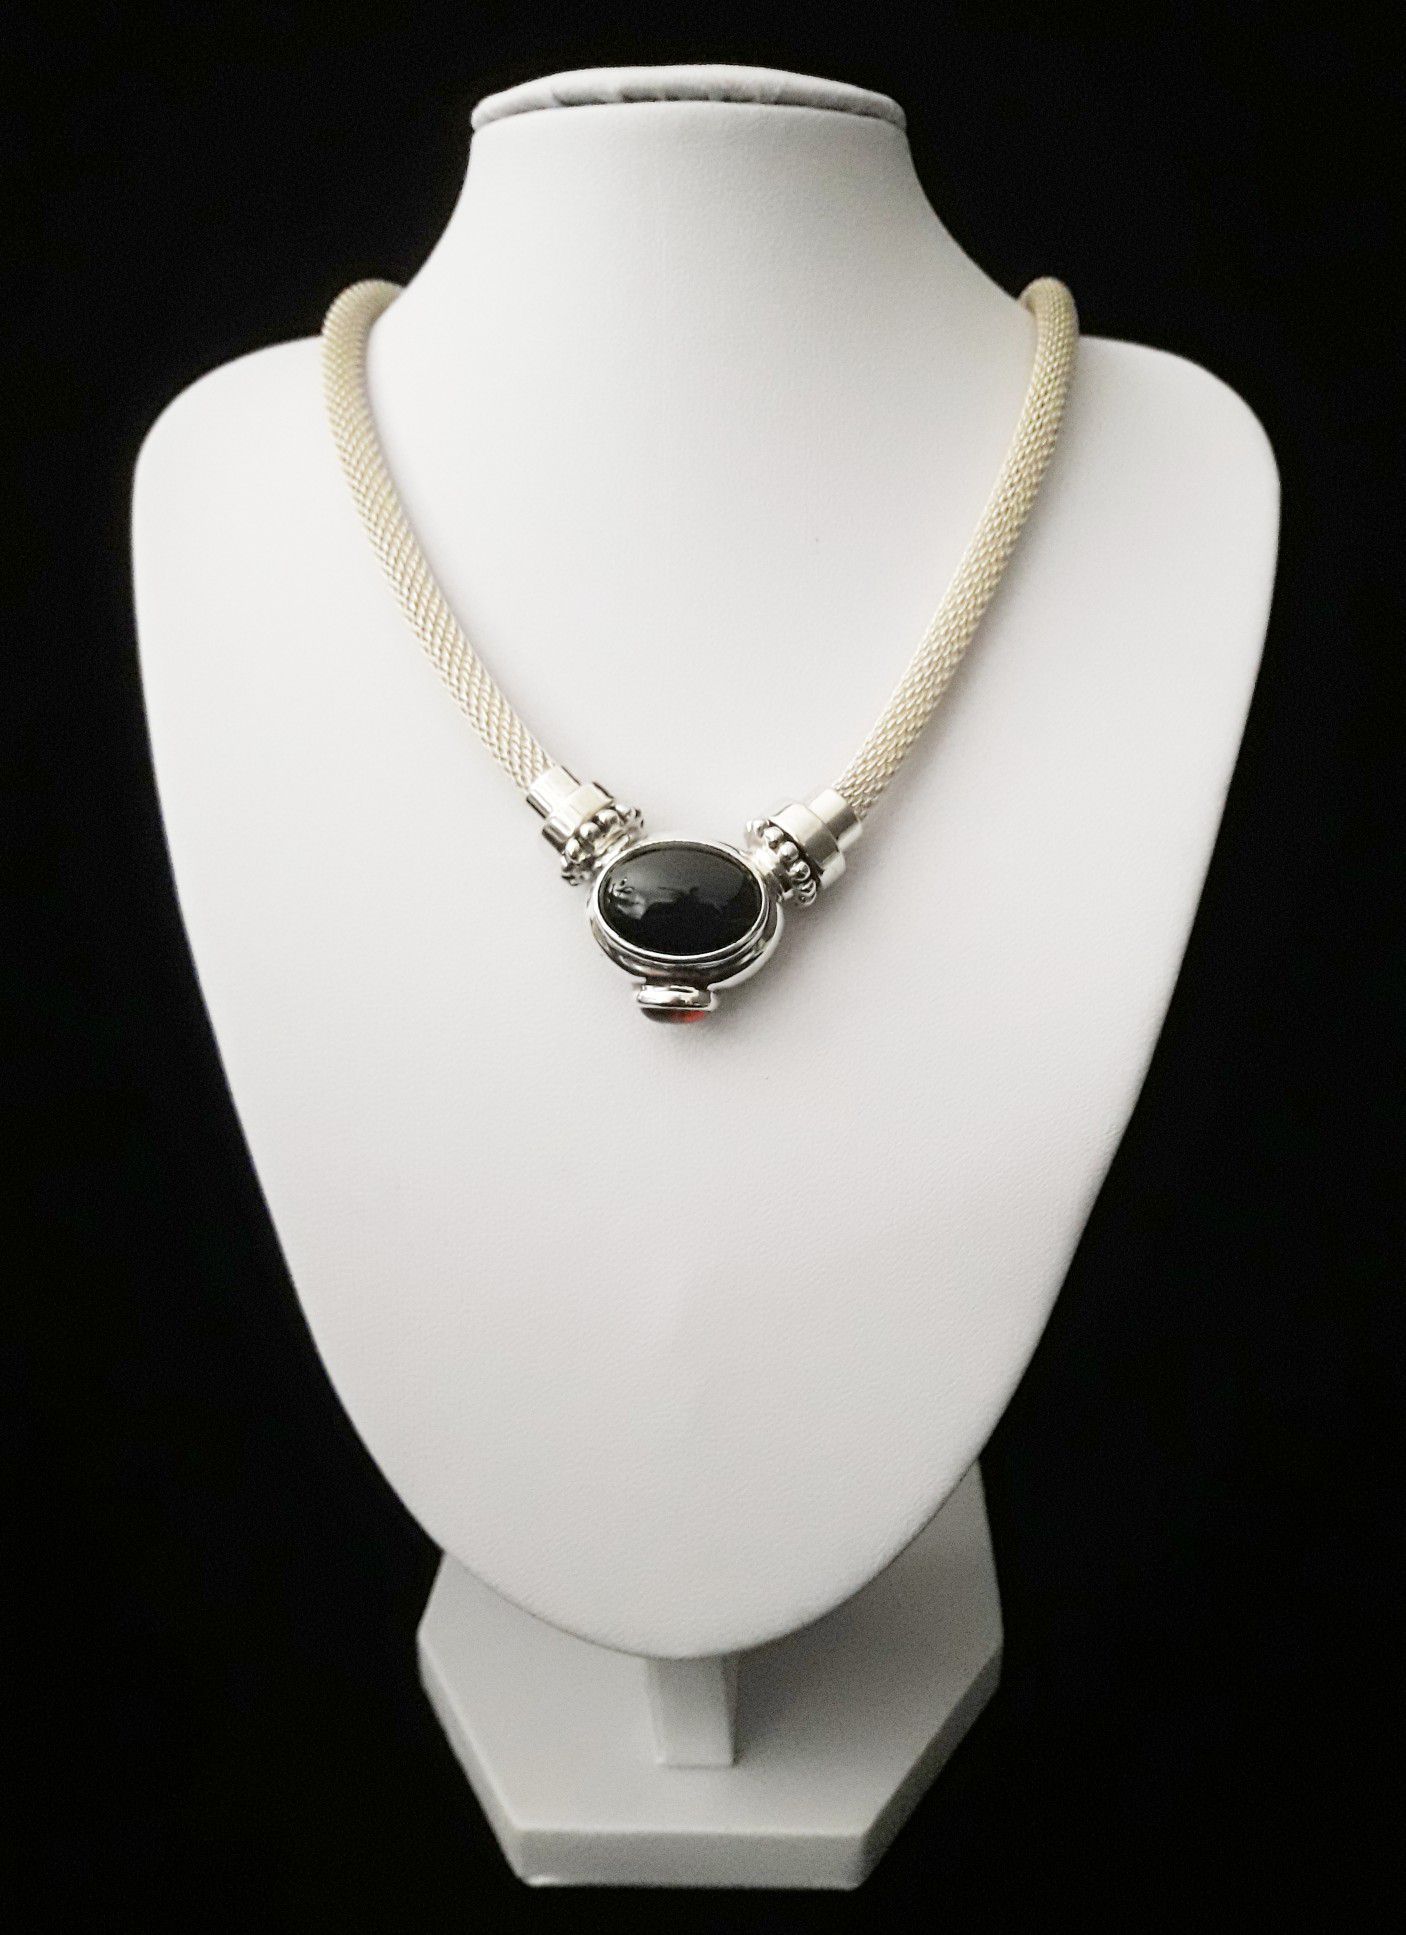 17" (Joseph Esposito), Espo Sig, Espo Snap". Woven Solid Sterling Silver Necklace w Solid Sterling Silver Black Onyx & Amber Pendant, signed